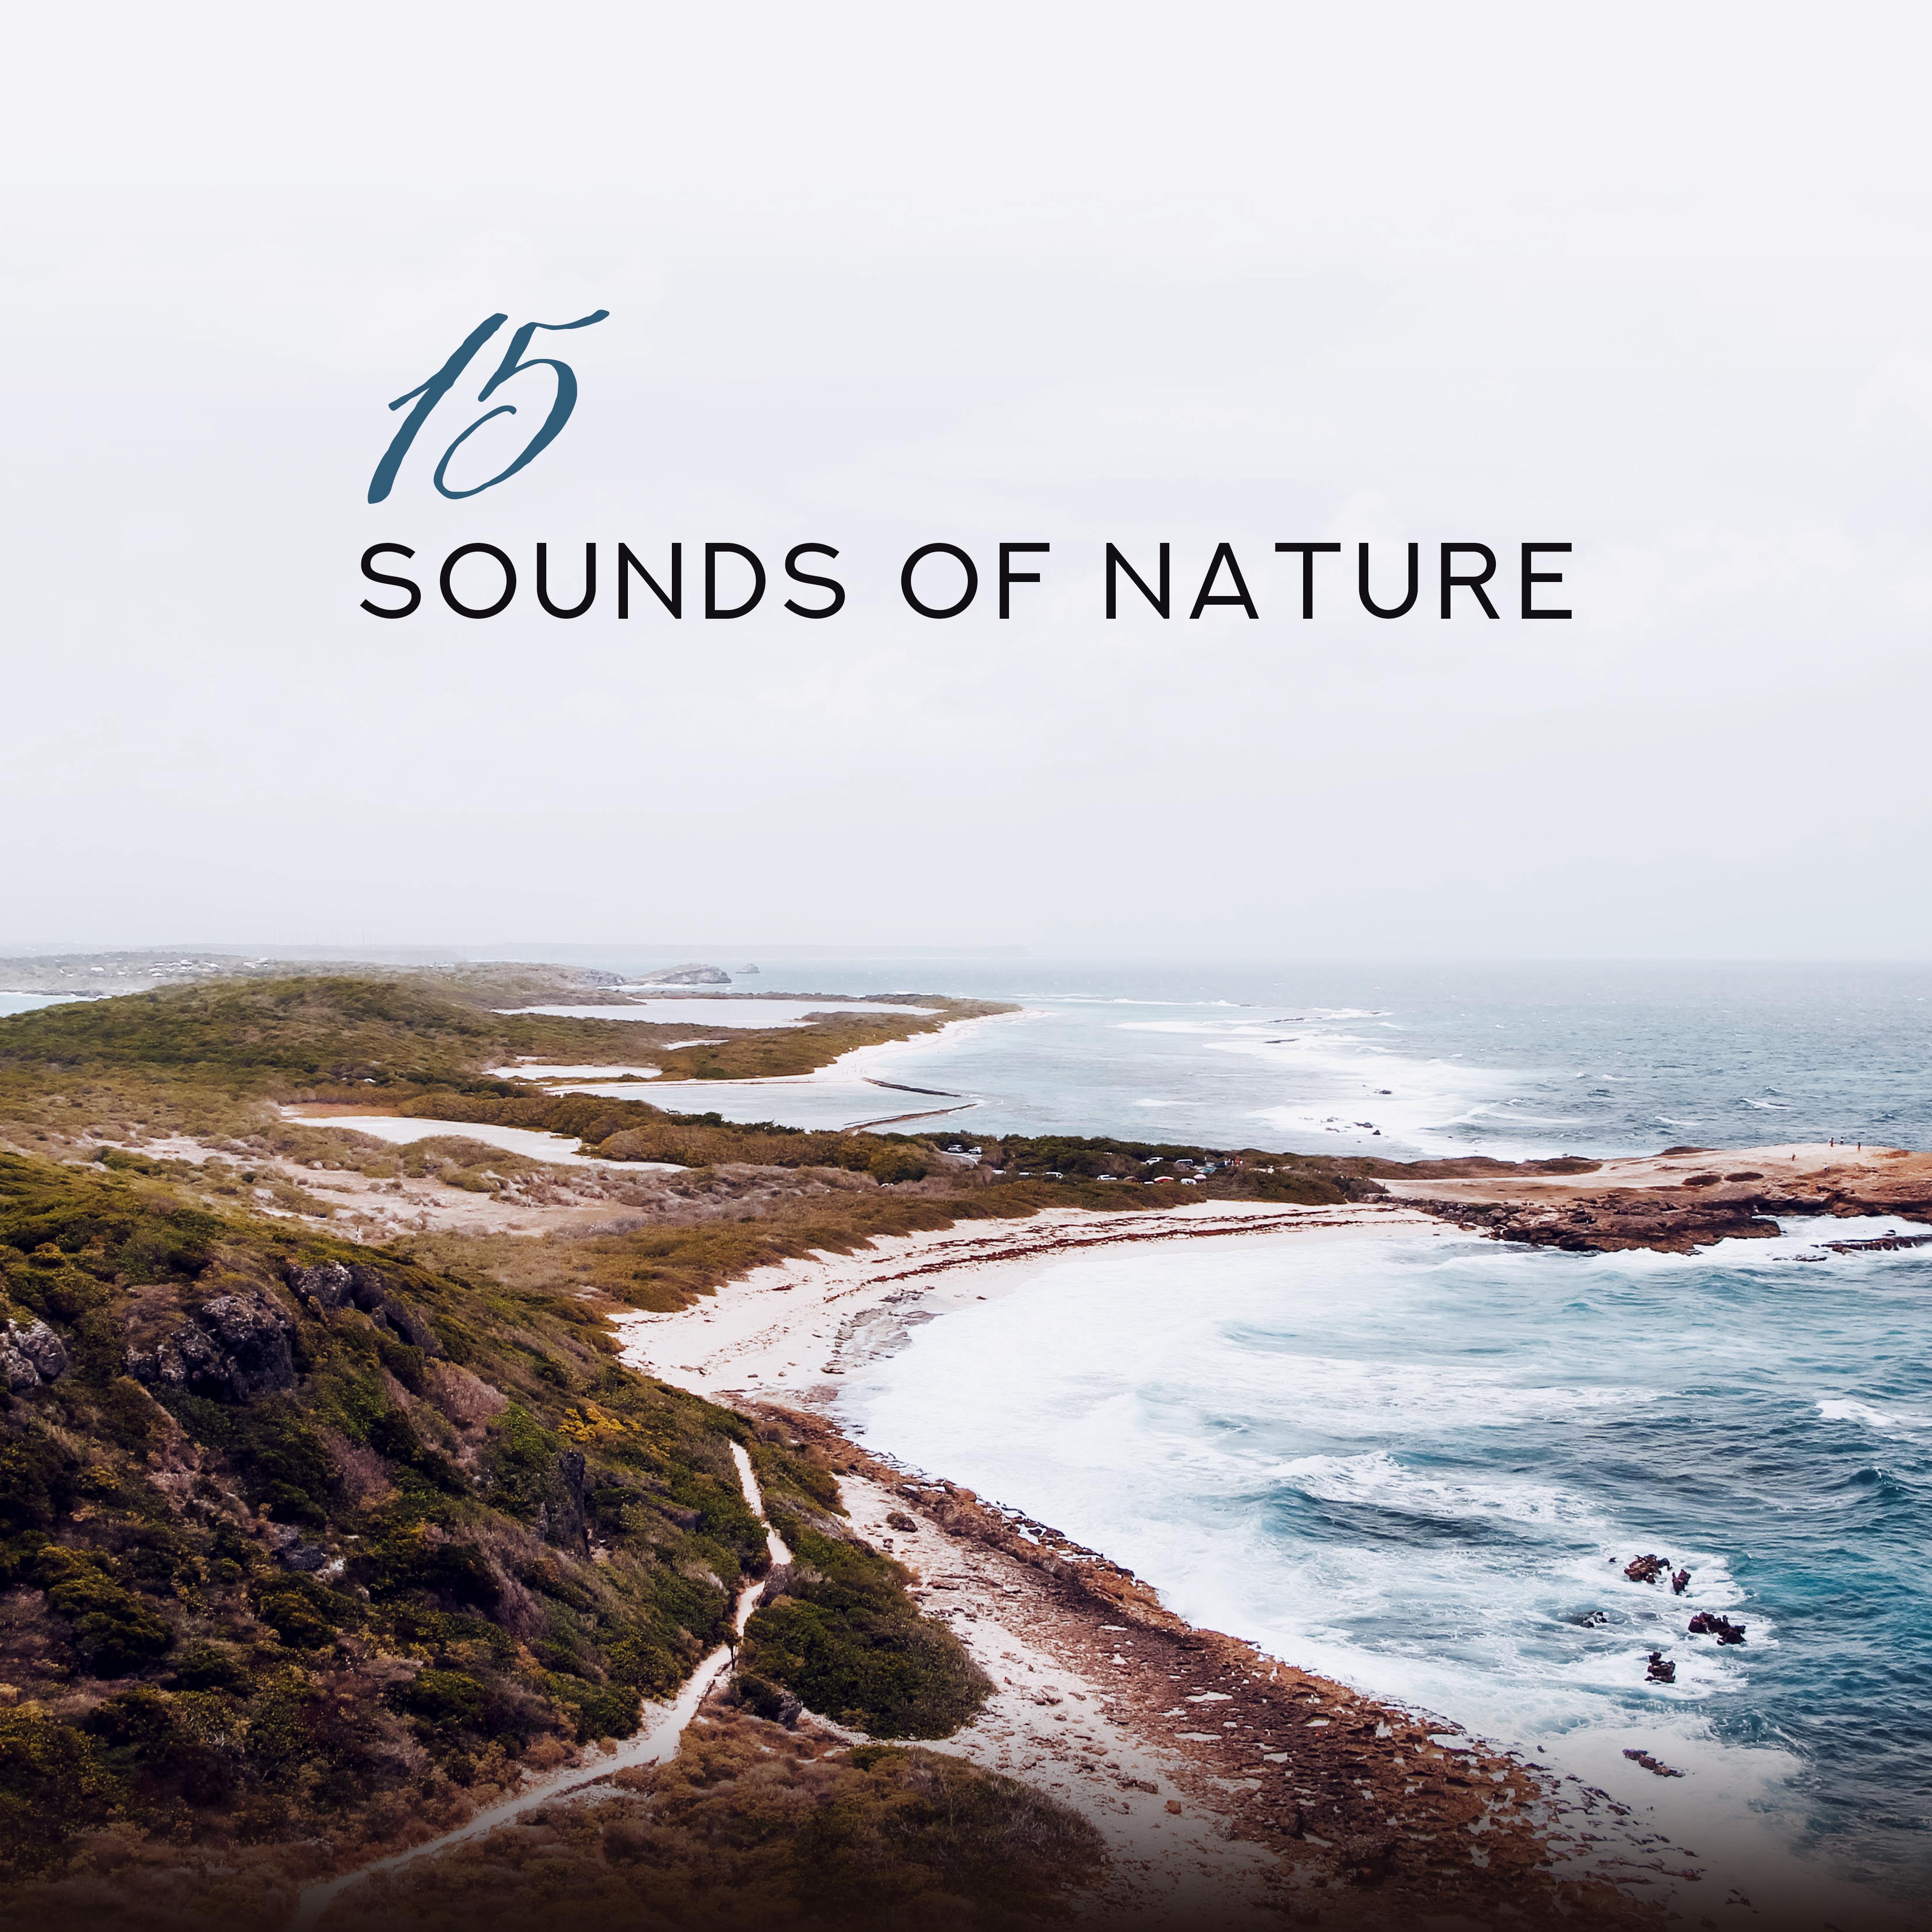 15 Sounds of Nature  Deep Therapy Music, Peaceful Sounds for Relaxation, Sleep, Deep Meditation, Rest, Spa, Lounge Music, Nature Sounds, Stress Relief, Music Zone